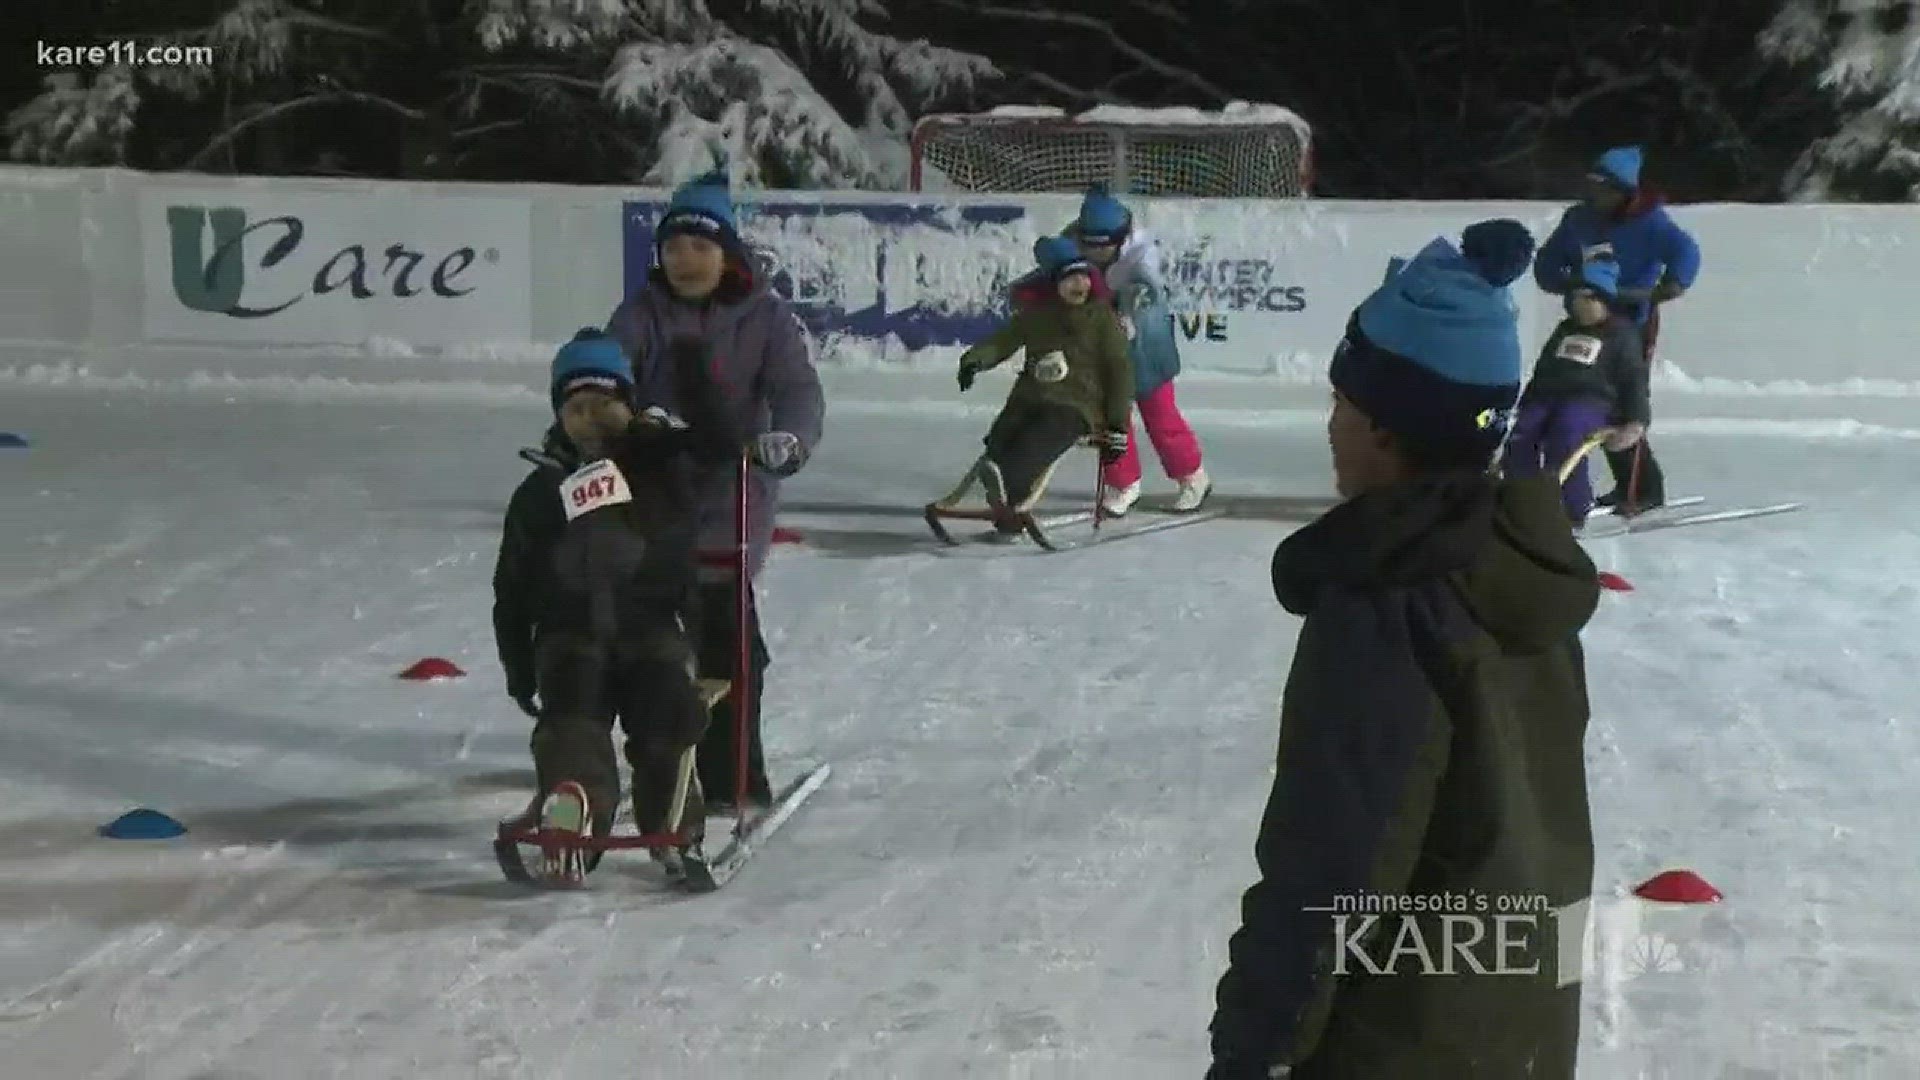 The Kidarod, a winter foot race for kids, is taking place Feb. 24 at Fish Lake Regional Park in Maple Grove.